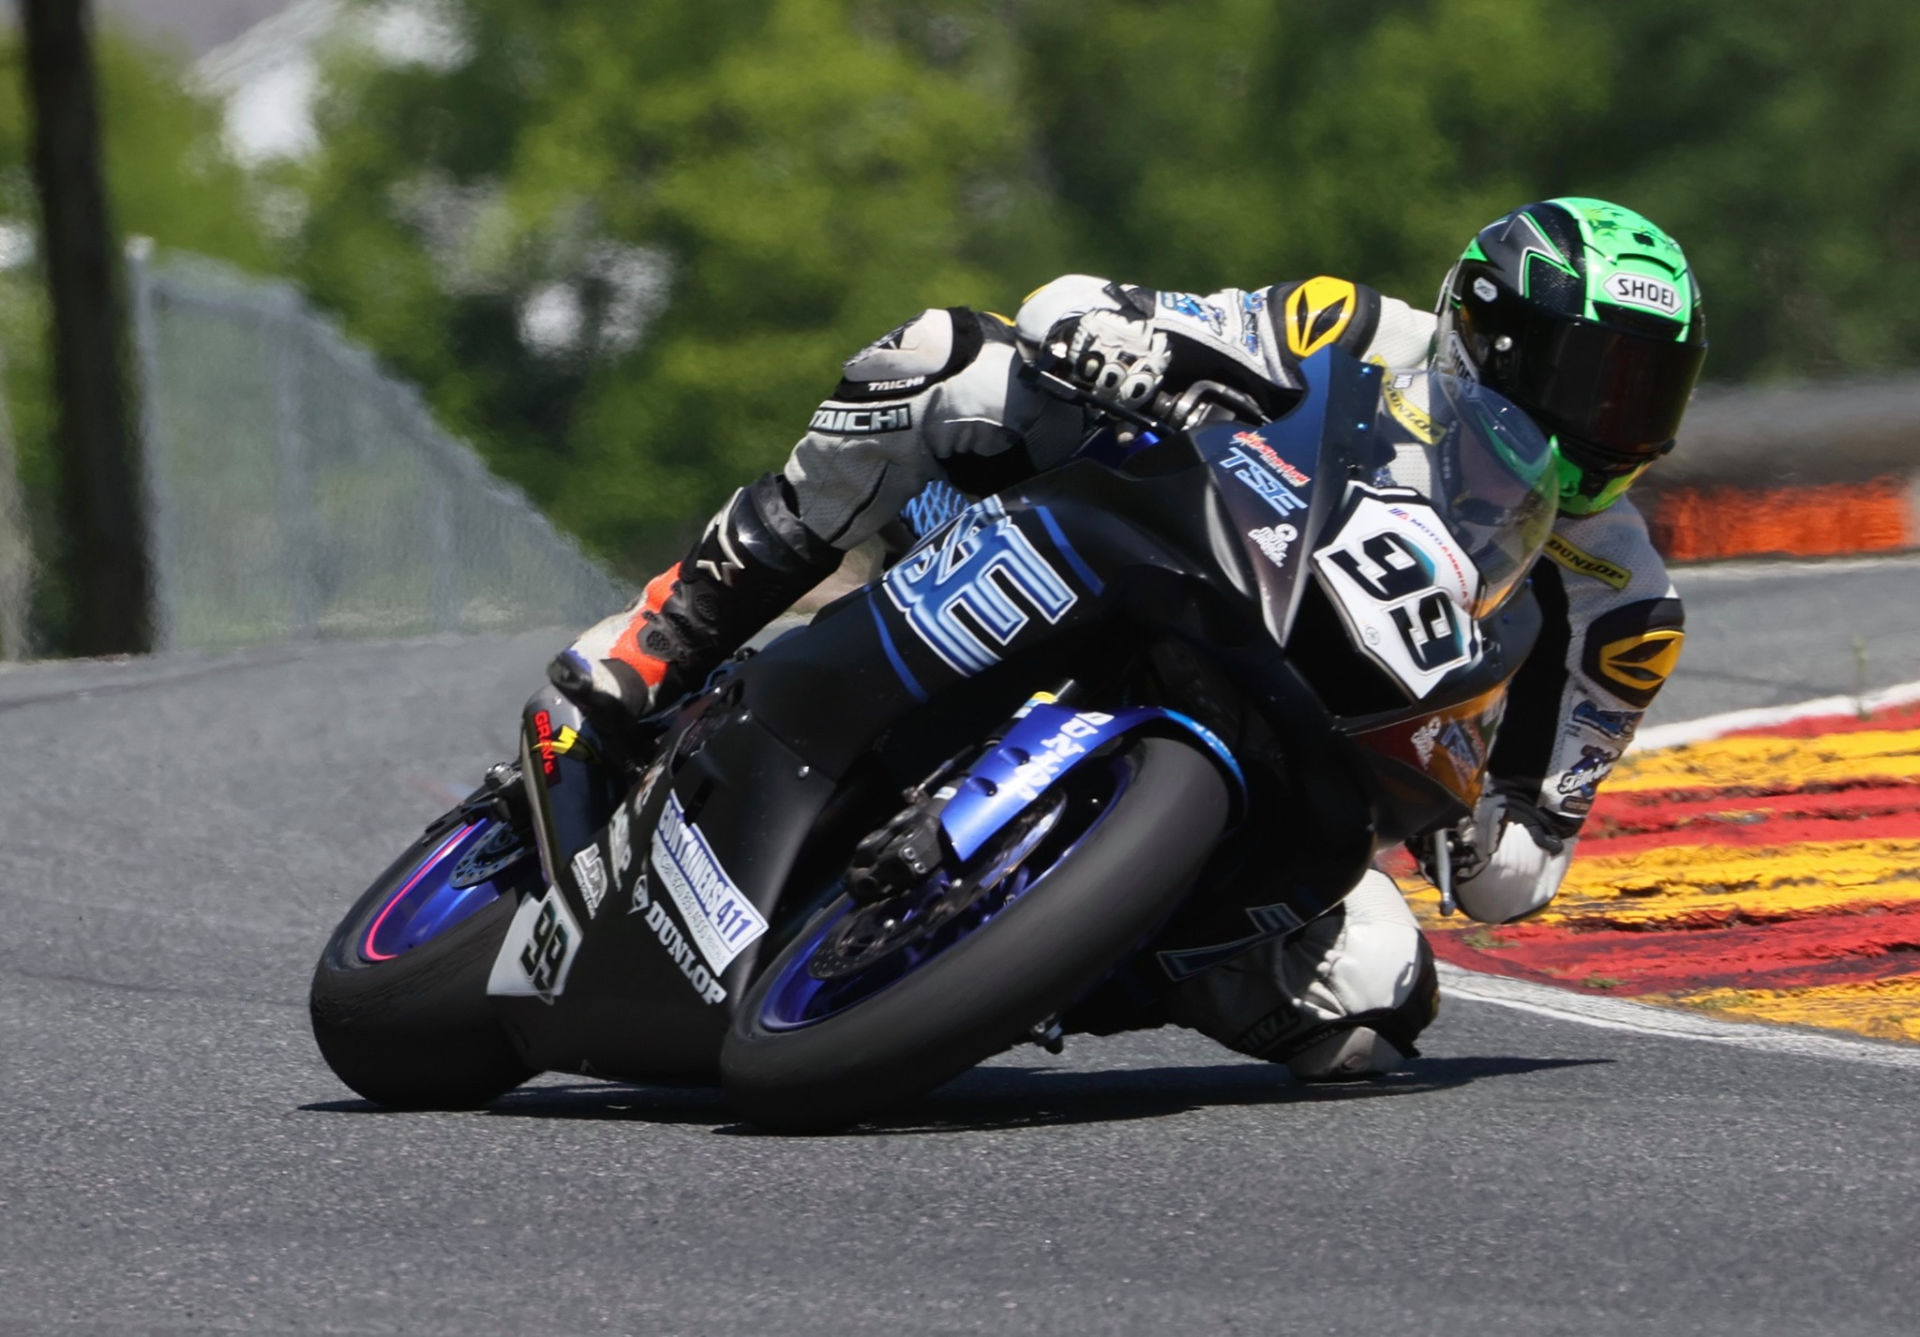 Nate Minster (99) as seen during the 2020 MotoAmerica Supersport Championship. Photo courtesy Pure Attitude Racing.